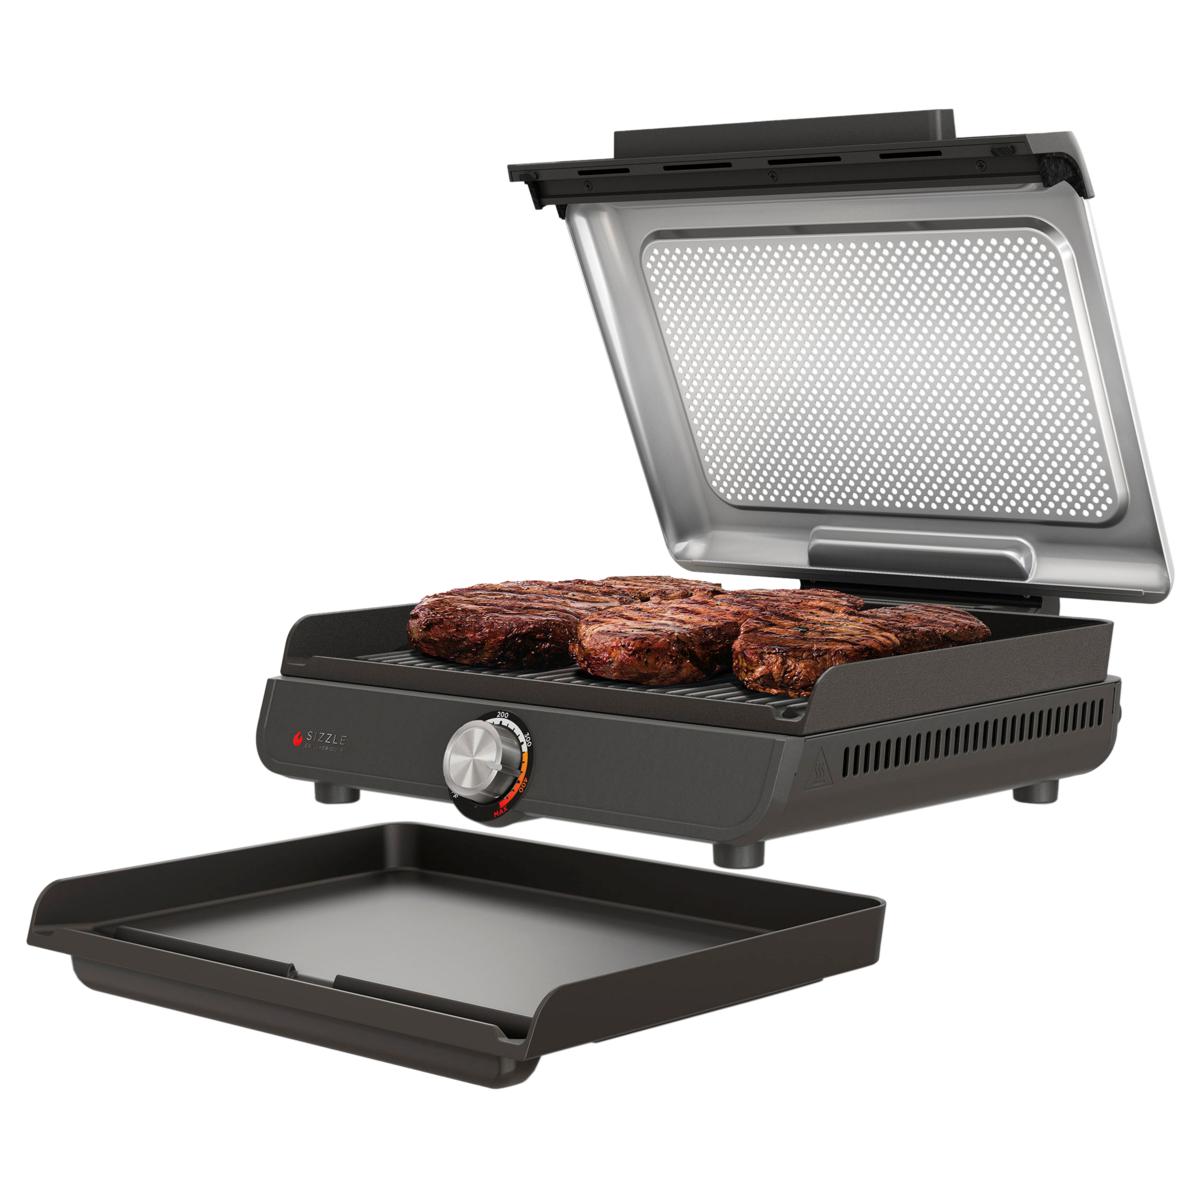 Ninja Sizzle Smokeless Indoor Grill As low as $69.99, Reg. $139.99, Shipped